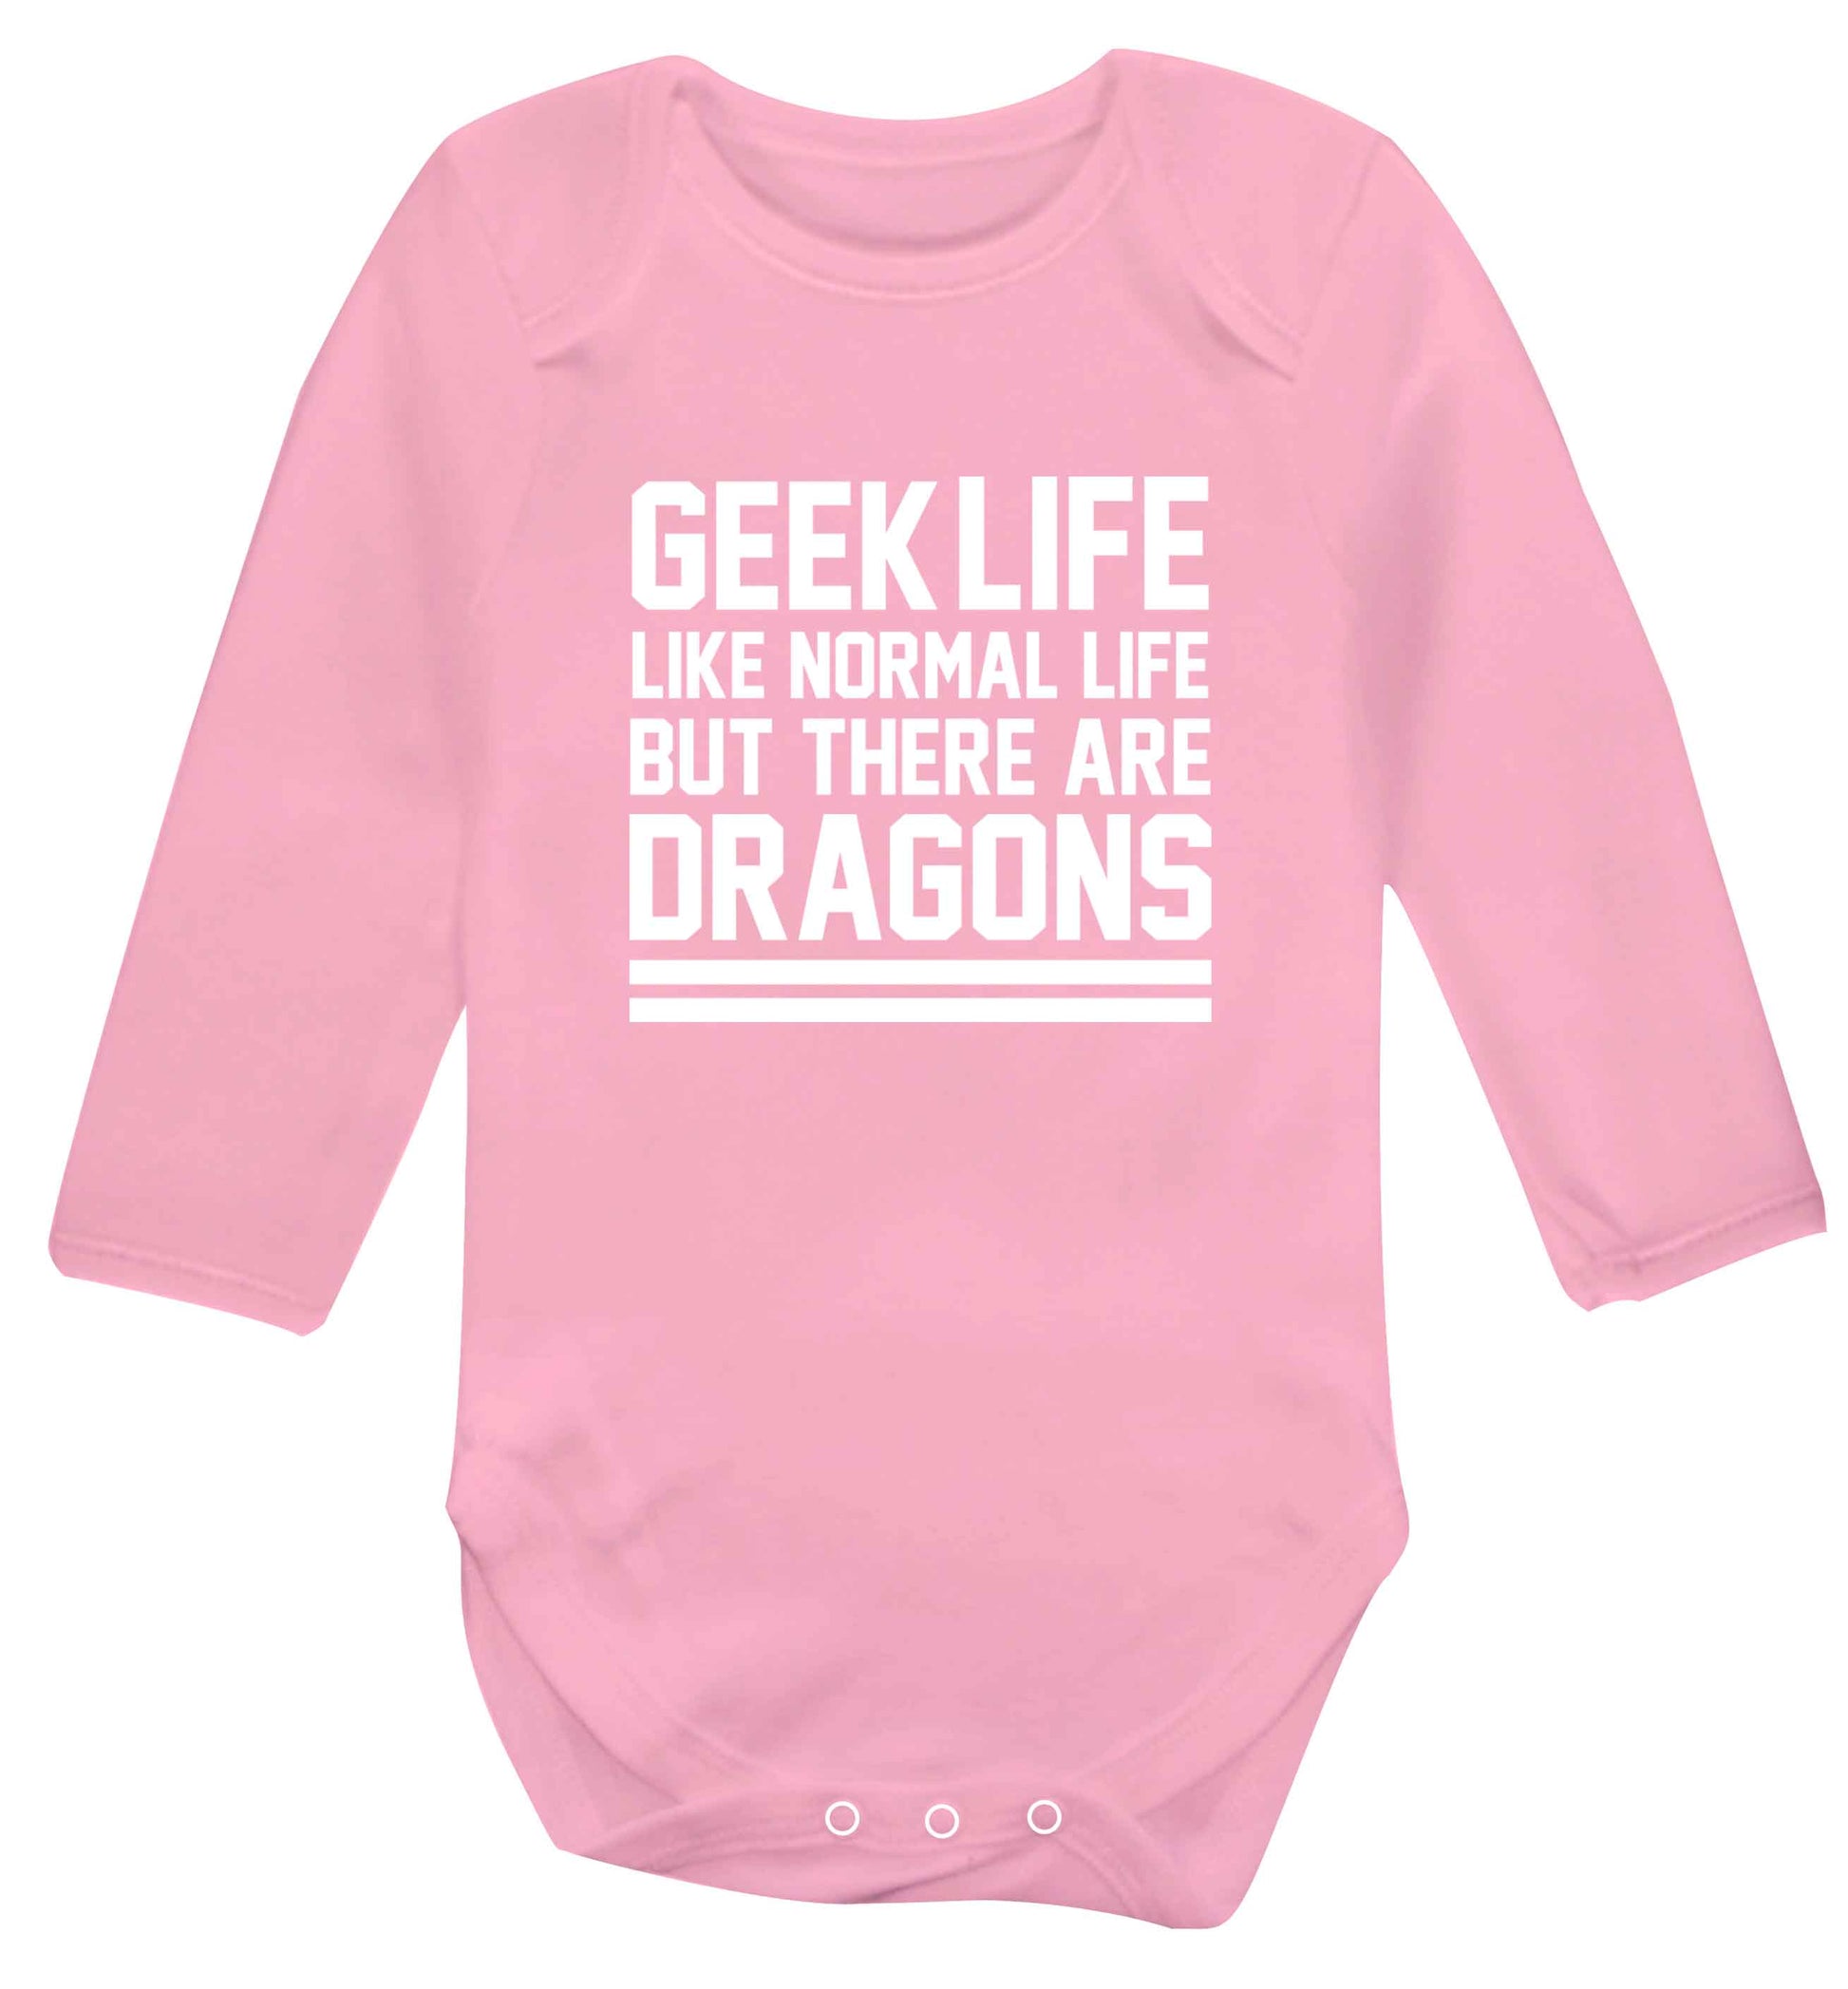 Geek life like normal life but there are dragons baby vest long sleeved pale pink 6-12 months